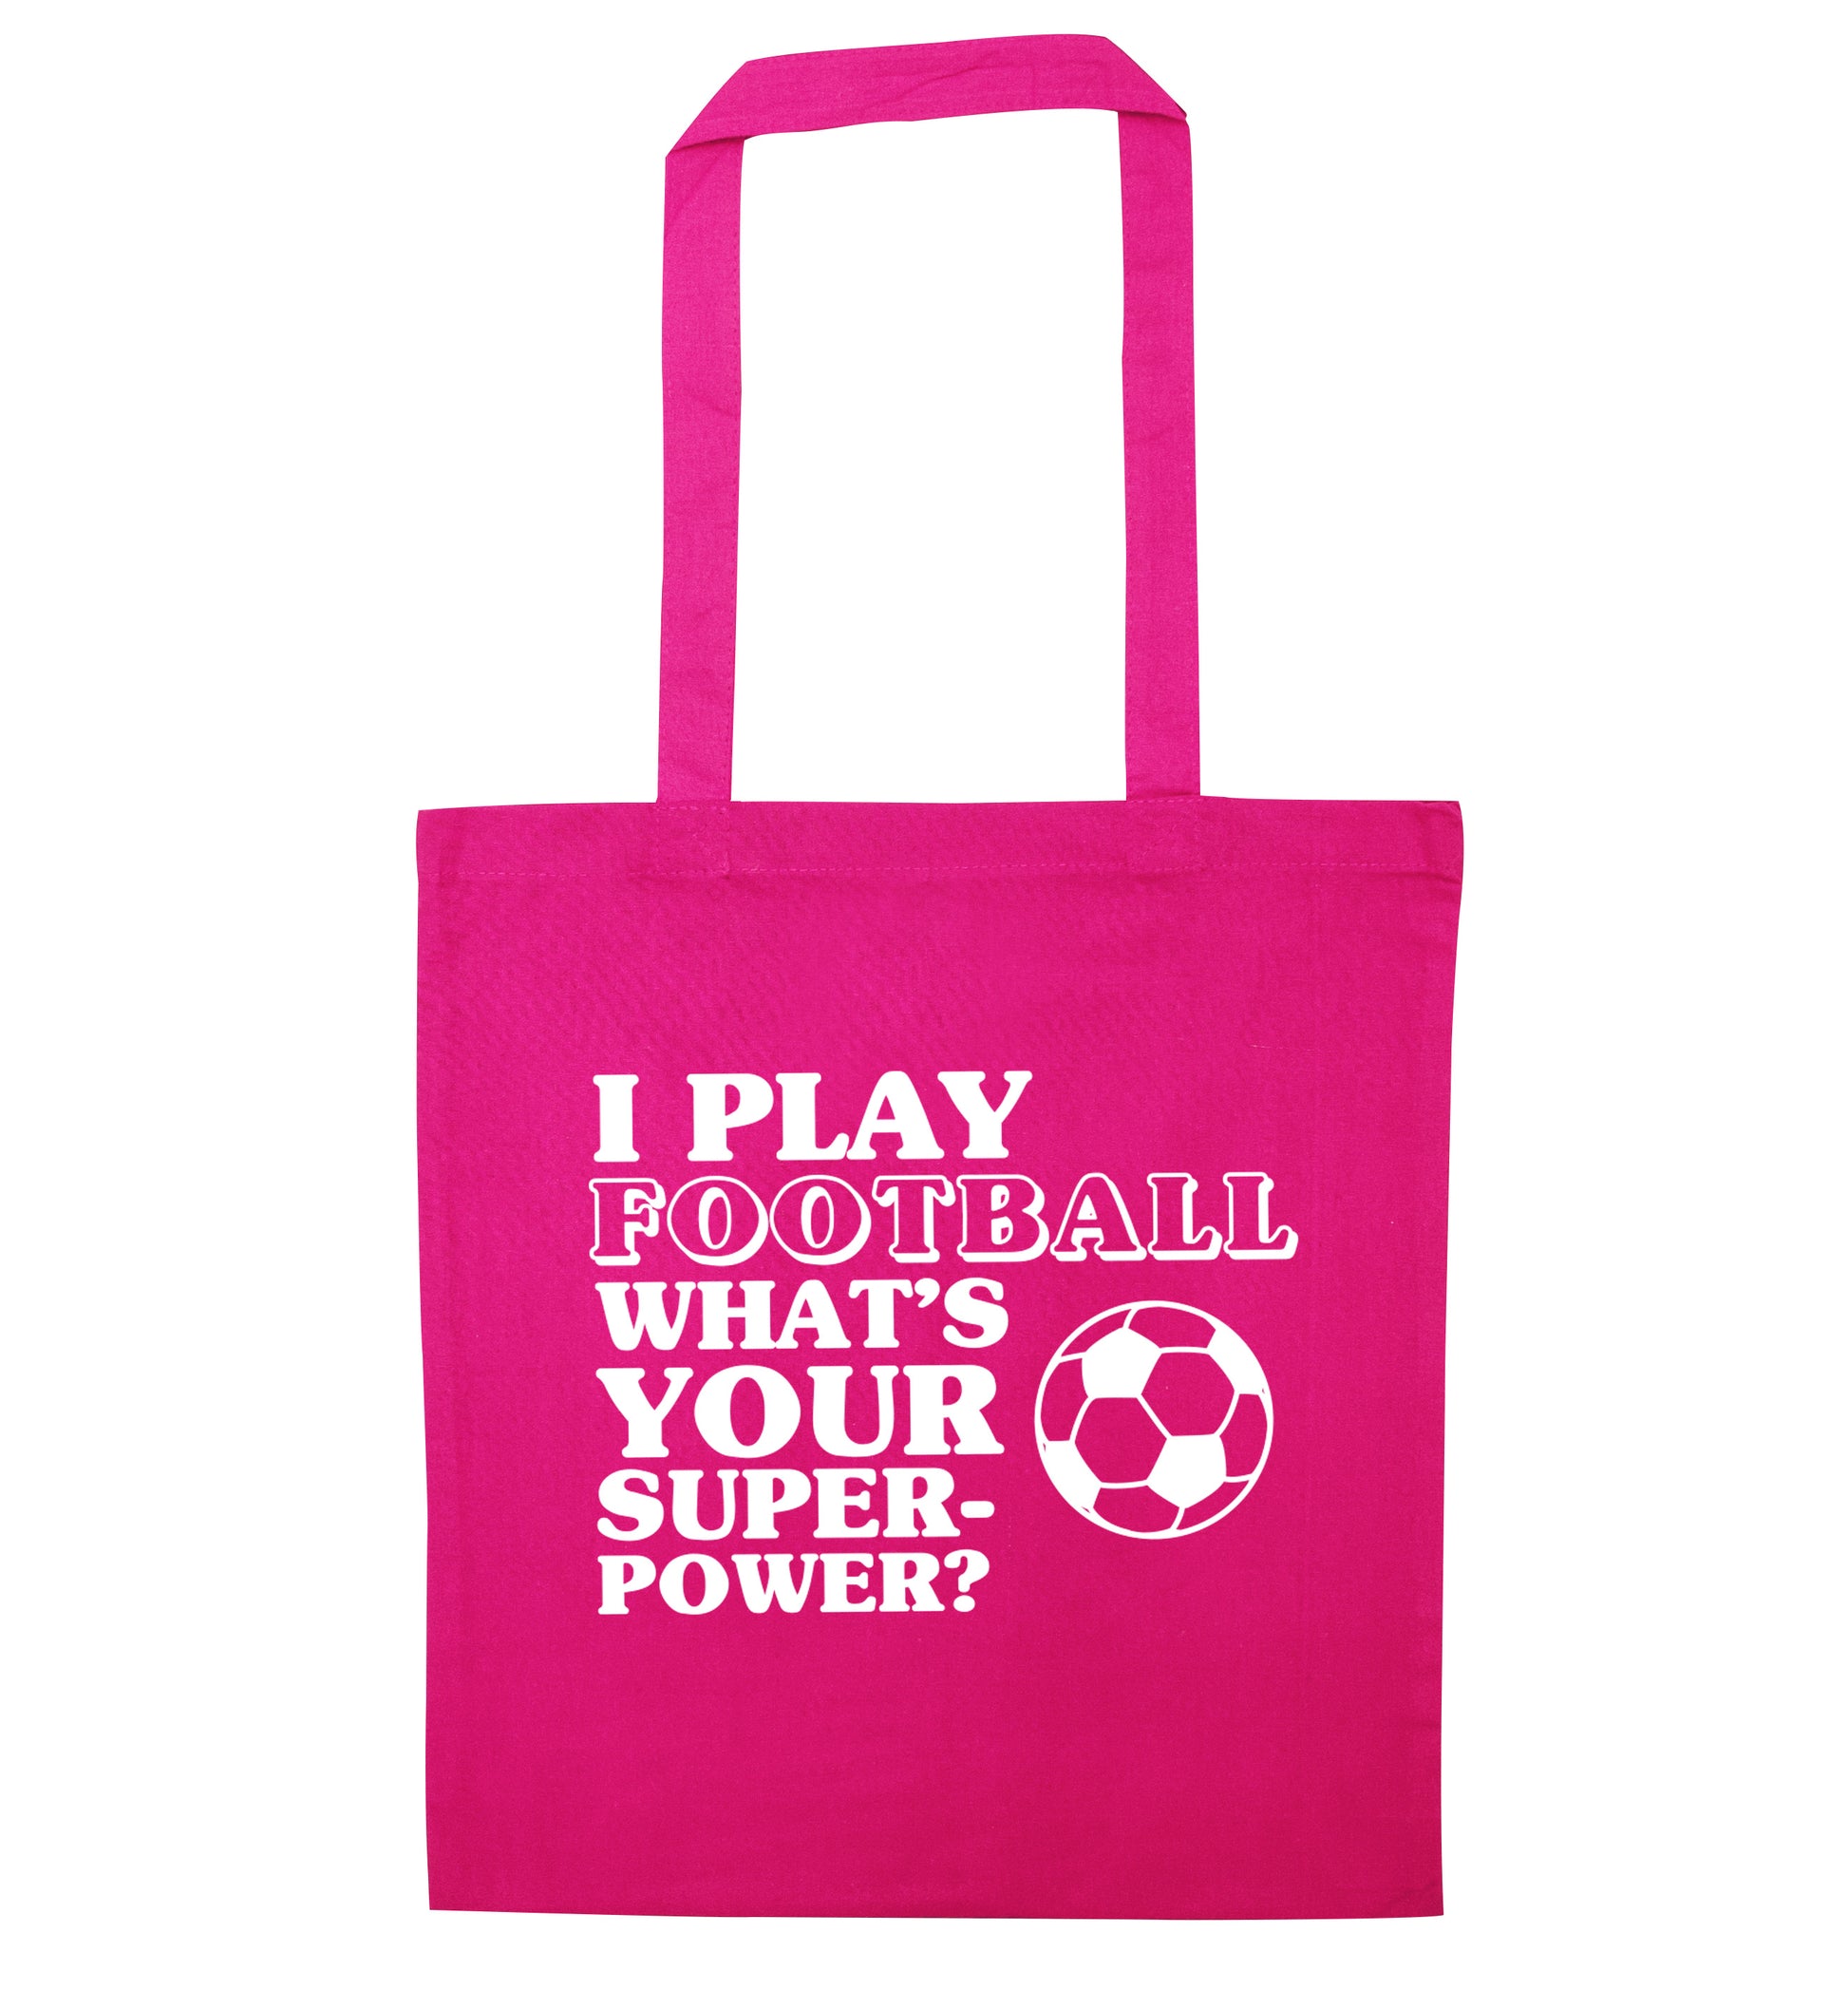 I play football what's your superpower? pink tote bag